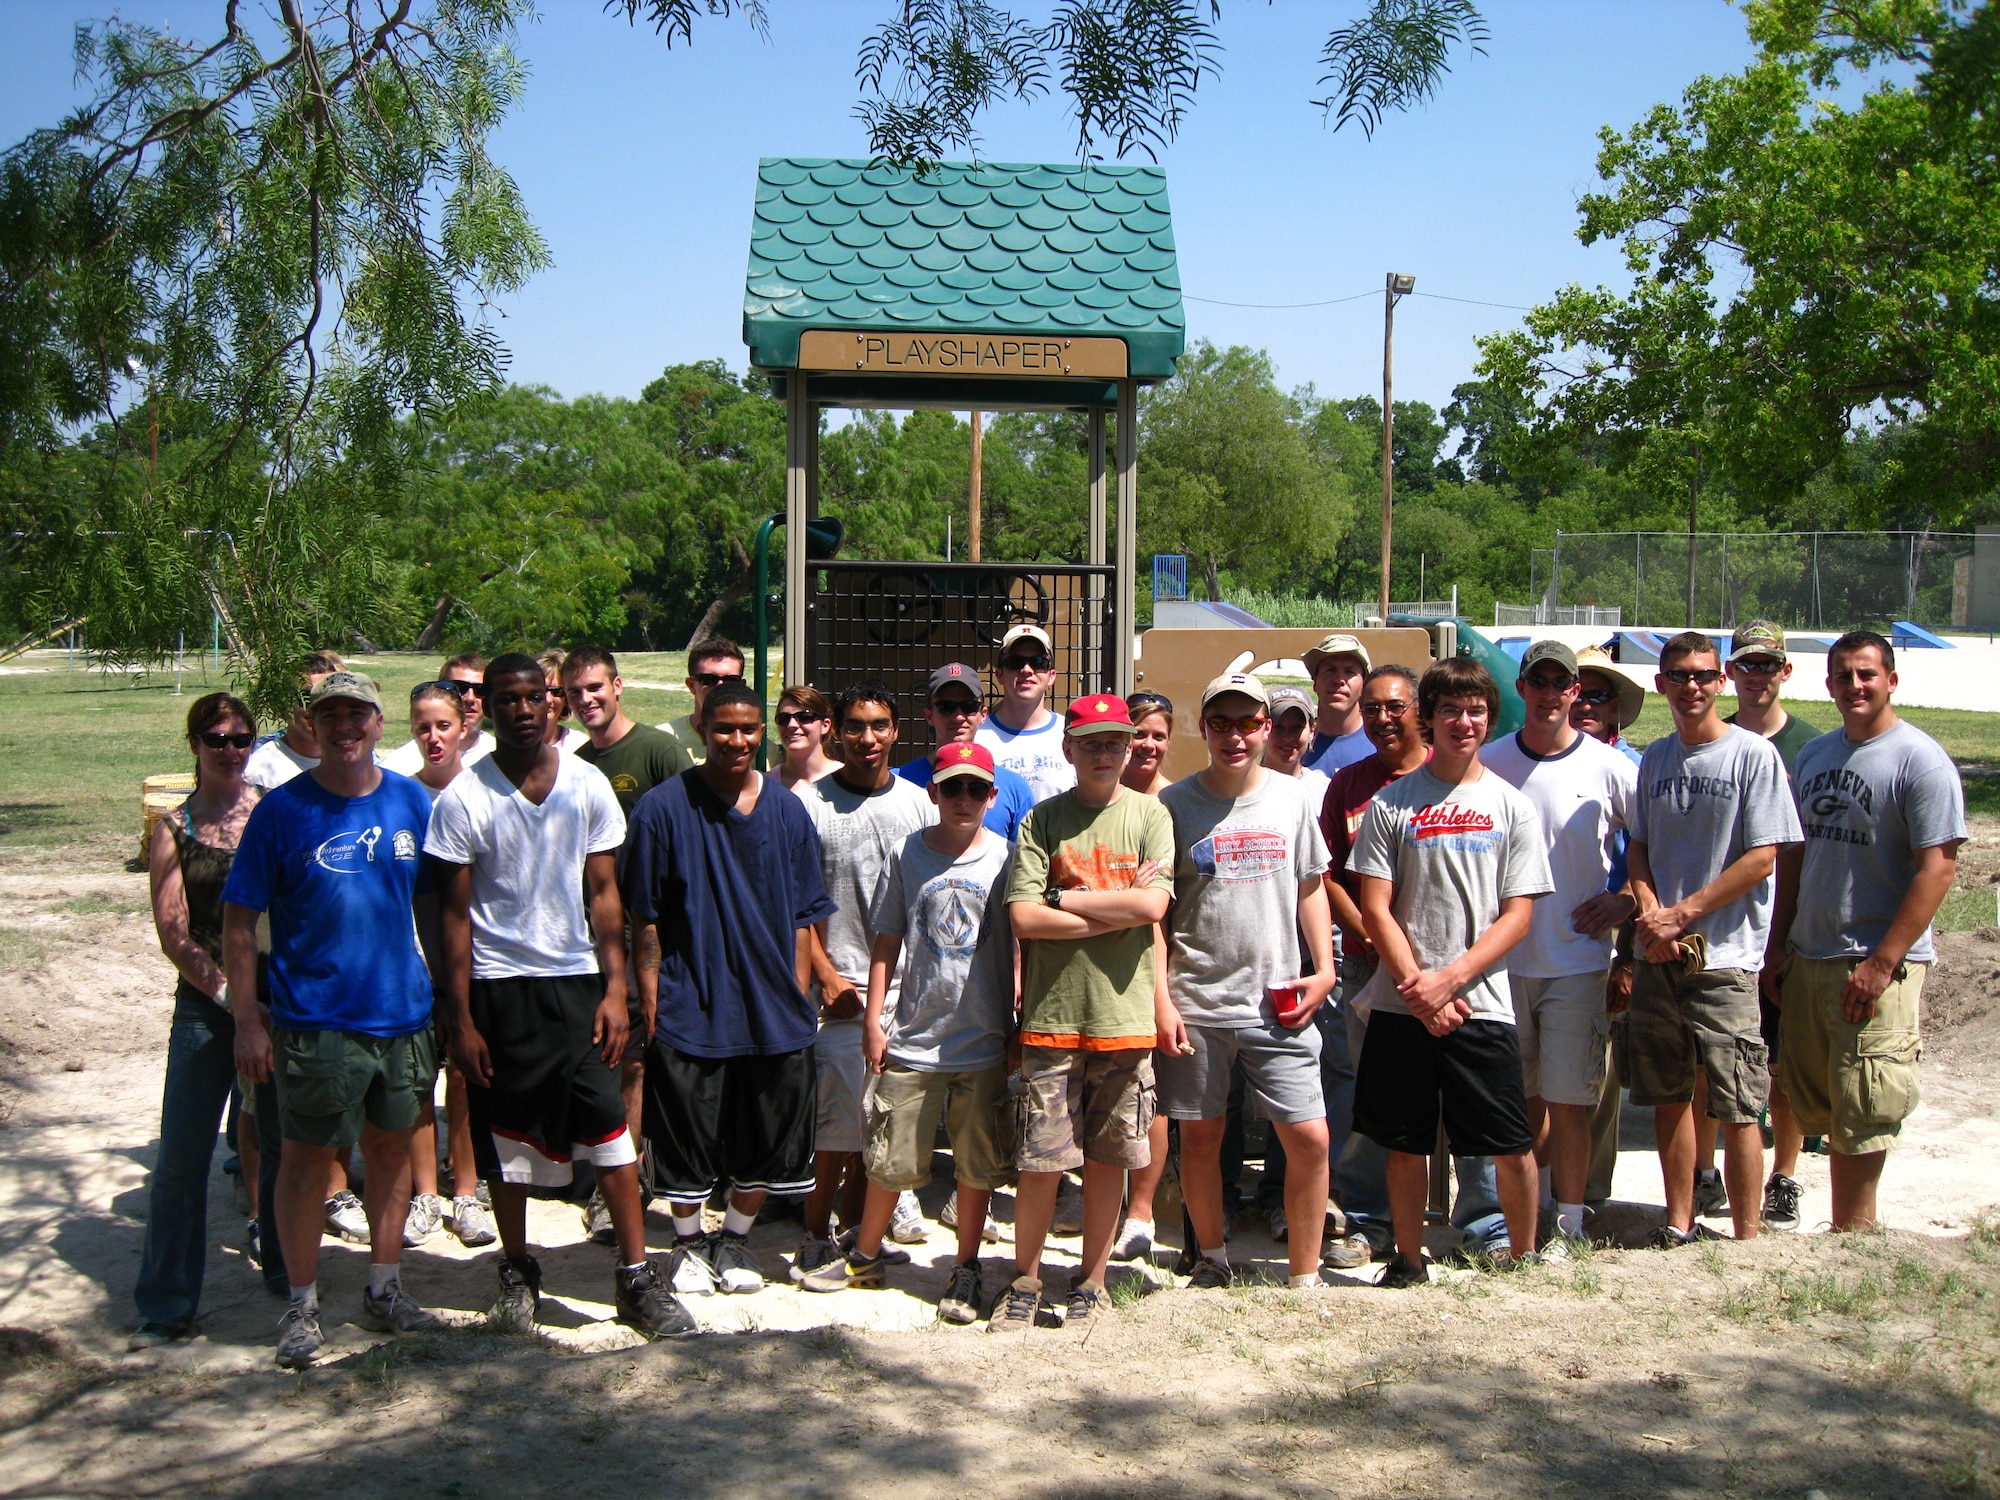 LAUGHLIN AIR FORCE BASE, Texas—Members of the Boy Scouts, Laughlin Air Force Base and the City of Del Rio stand in front of the playground set they built for local children to enjoy June 27.  Daniel Cinnamon and David Garcia, Eagle Scout Candidates and Life Scouts from Troop 280, spearheaded the project and were responsible for organizing the volunteer team and obtaining donations from the local business community. (U.S. Air Force photo by Lt. Col. John Cinnamon)